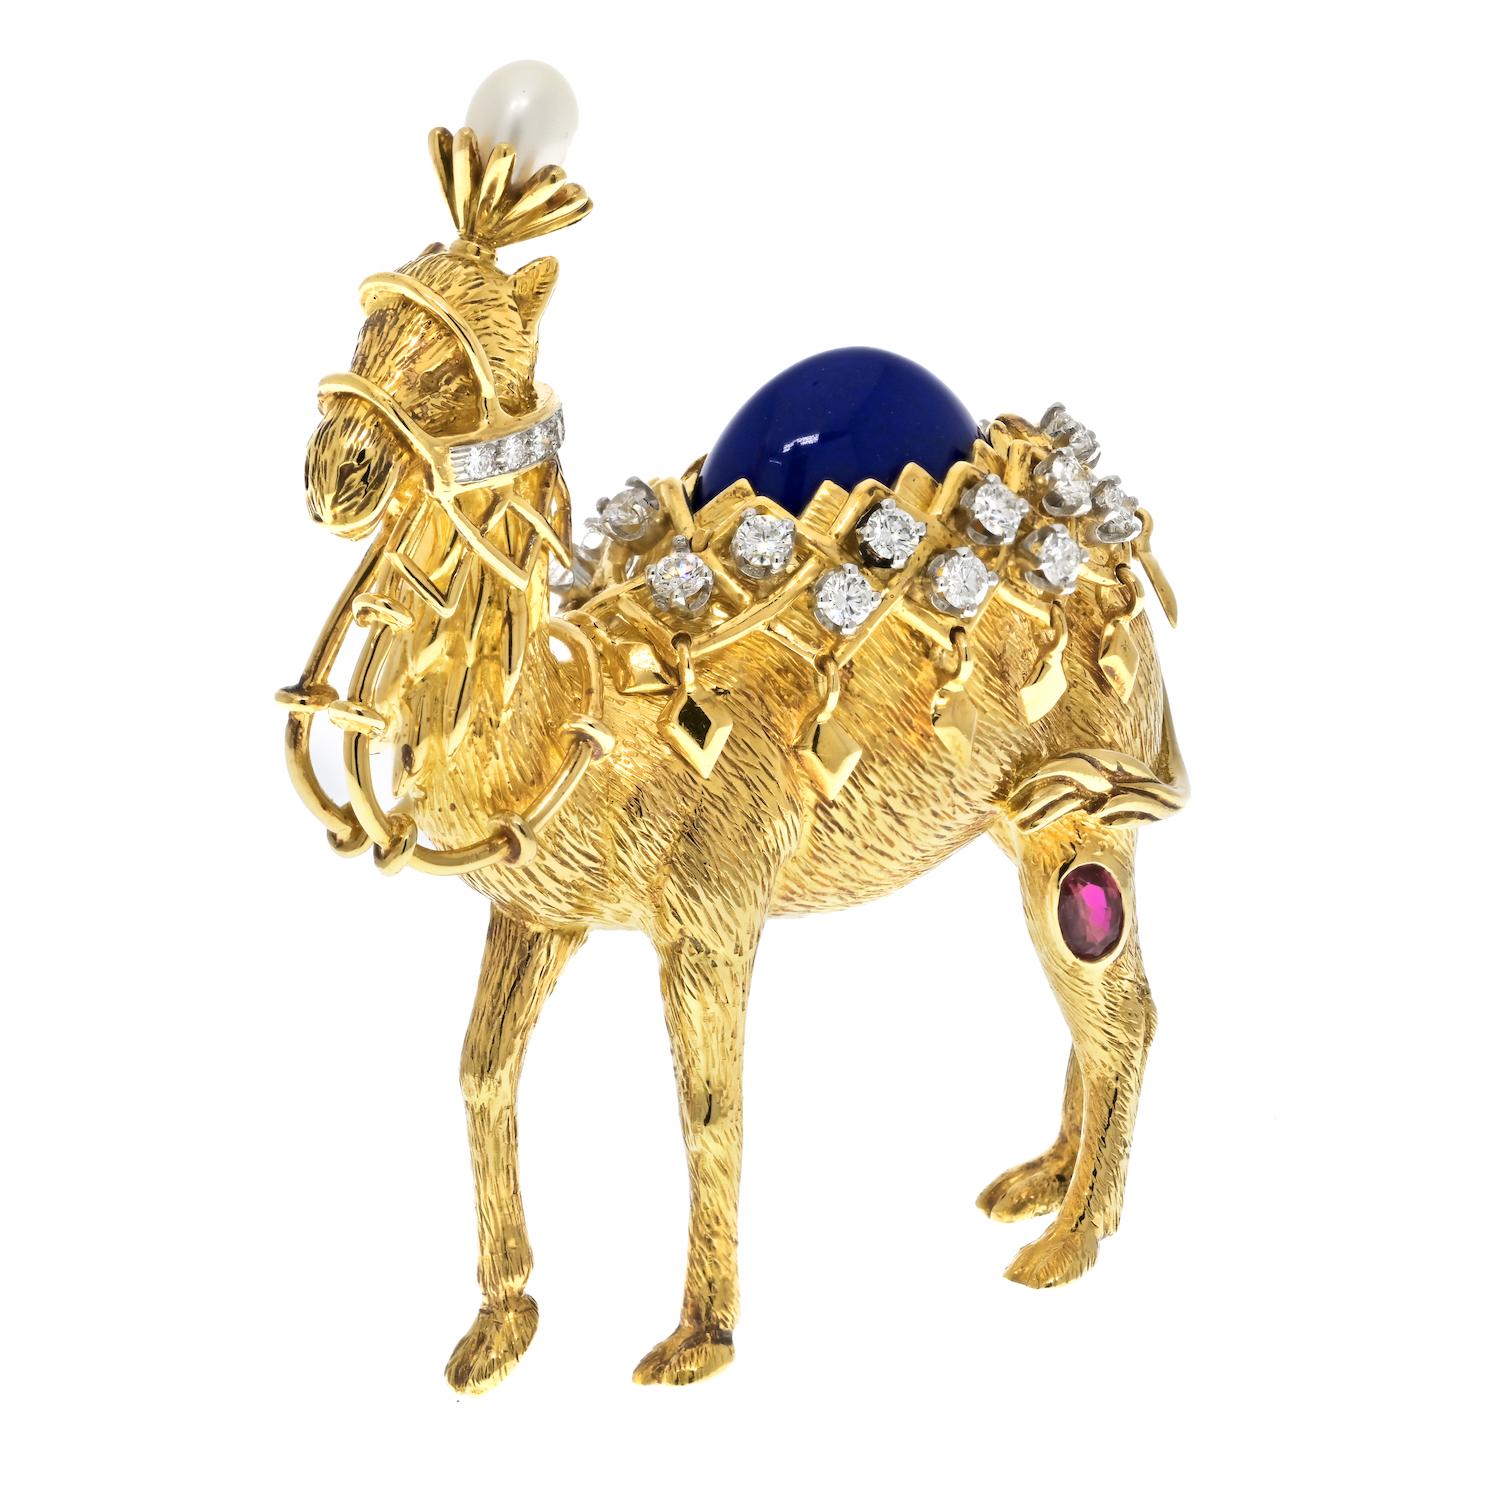 The vintage camel brooch designed by Jean Schlumberger for Tiffany & Co. is a masterpiece of exquisite craftsmanship and lavish decor. The brooch is a stunning depiction of a camel, made from luxurious 18K yellow gold and adorned with ruby, pearl,